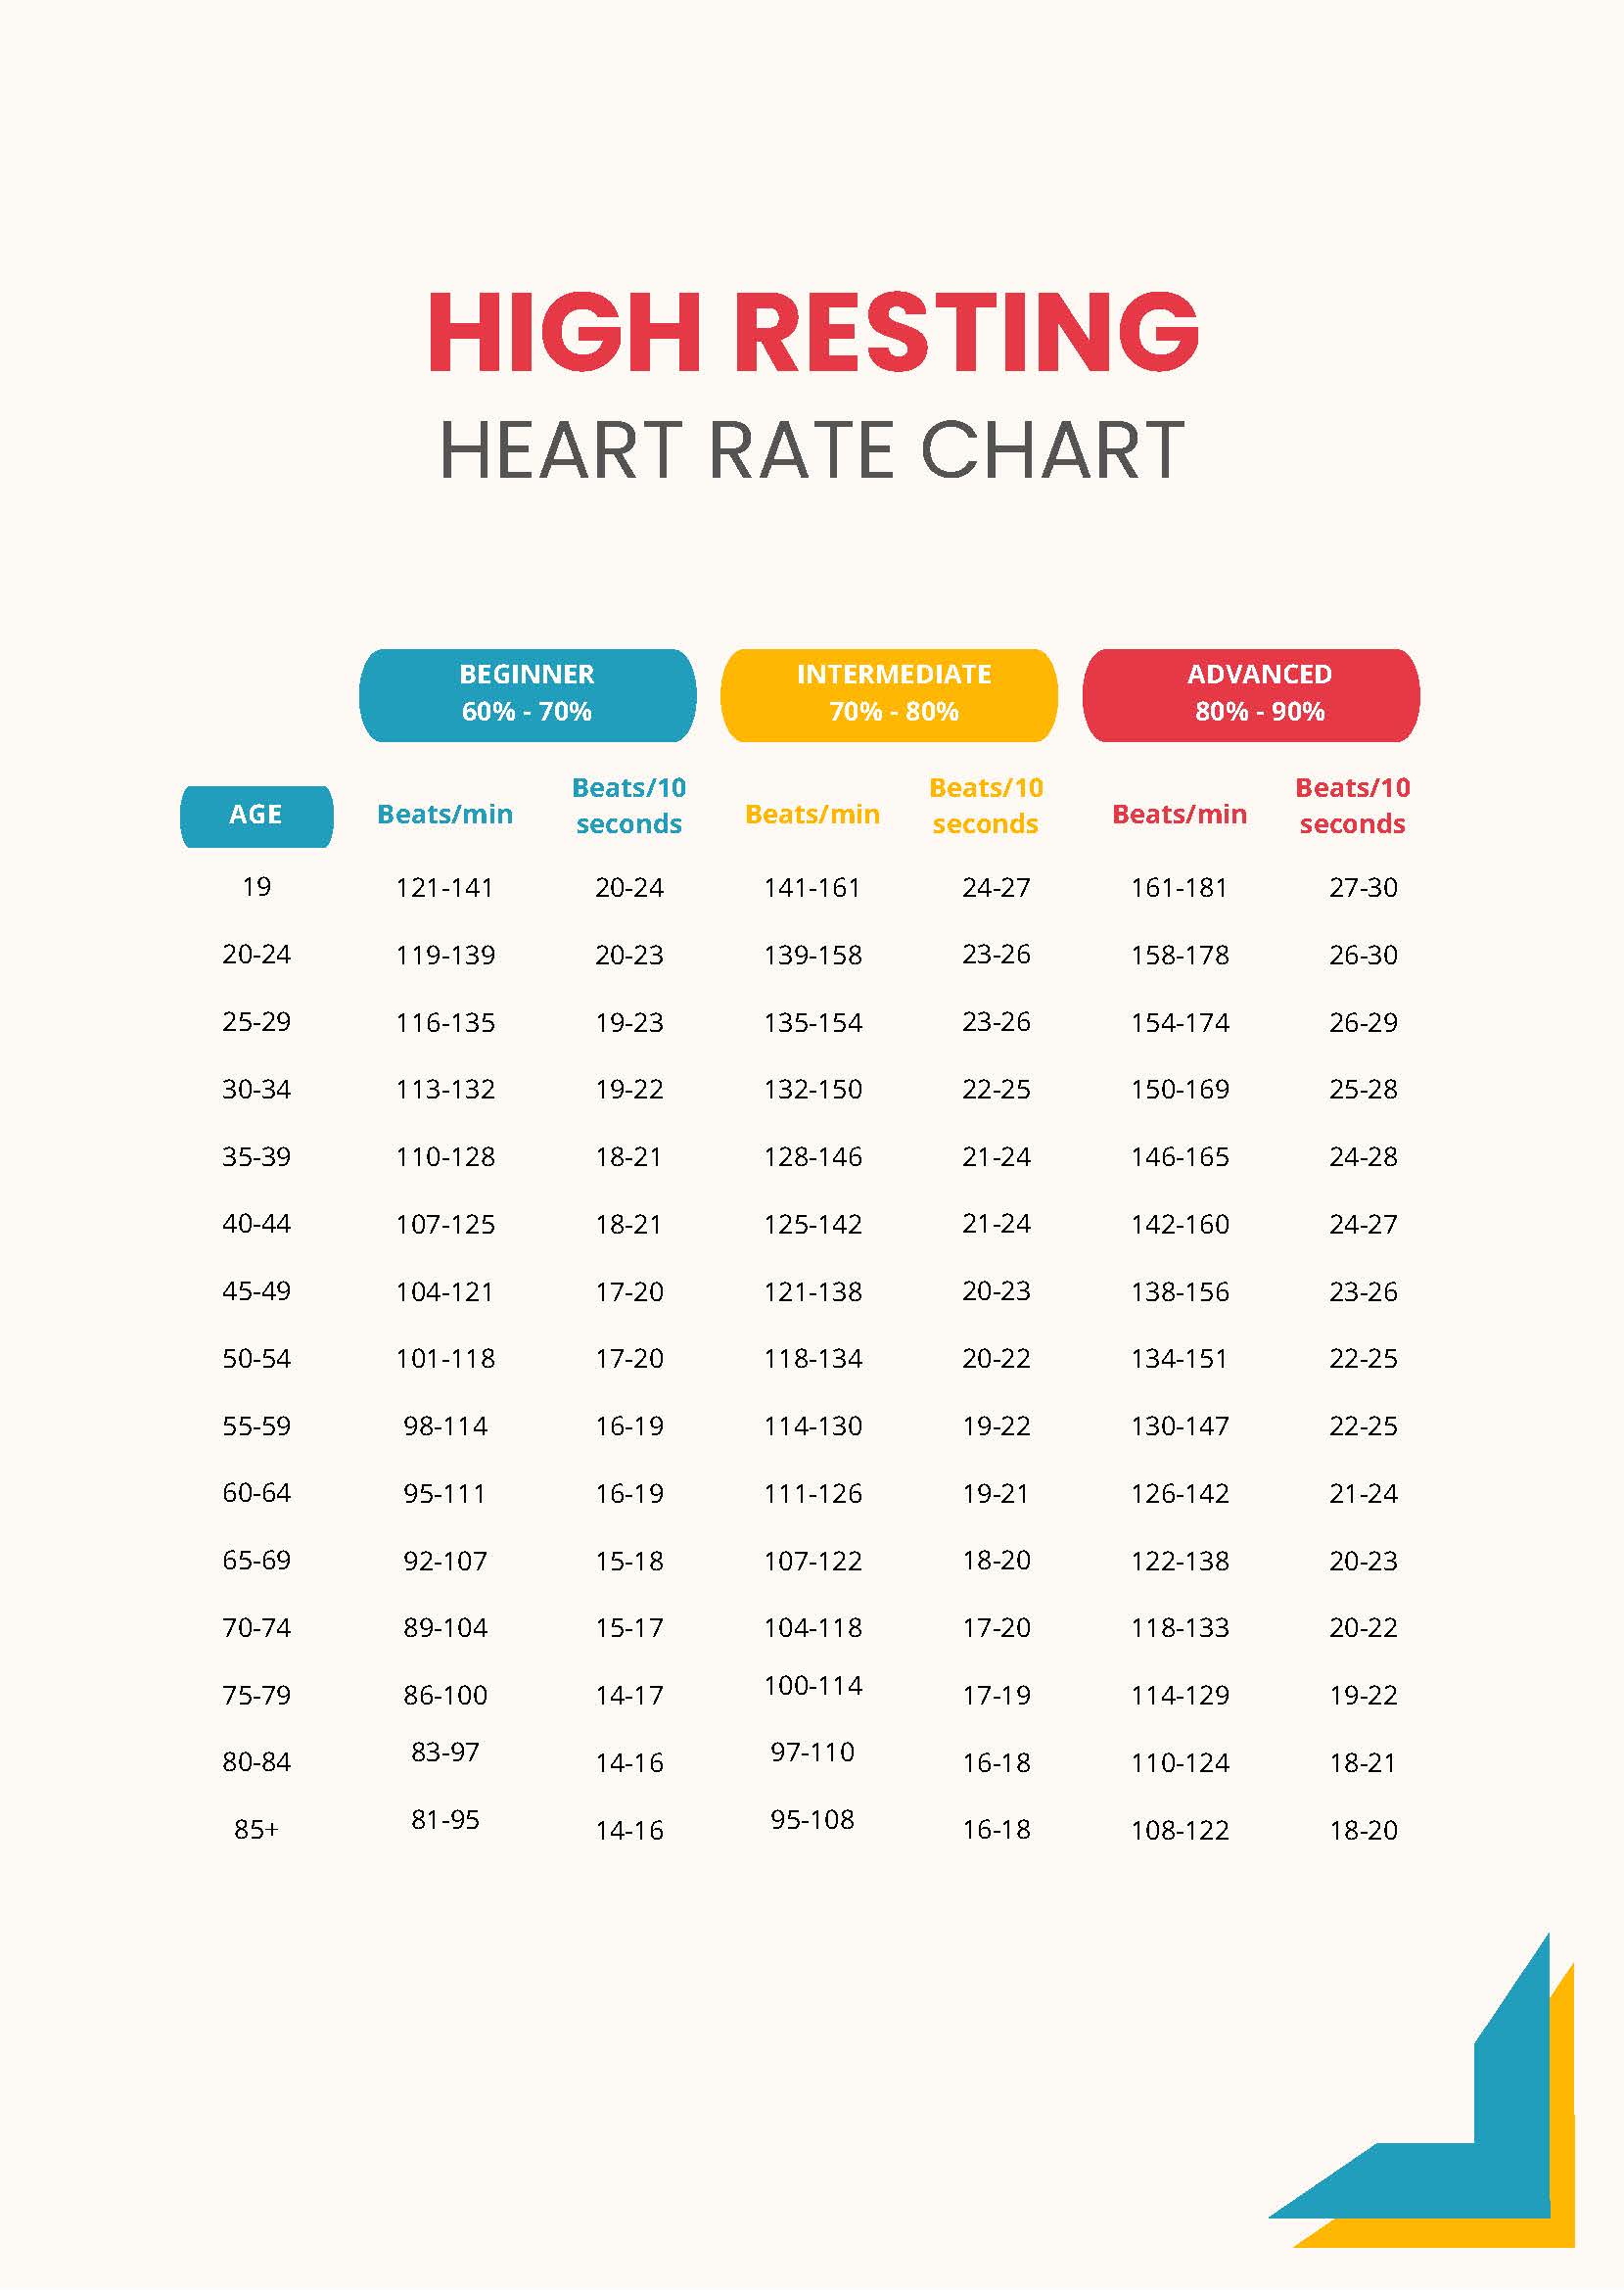 Ideal Heart Rate Chart in PDF - Download